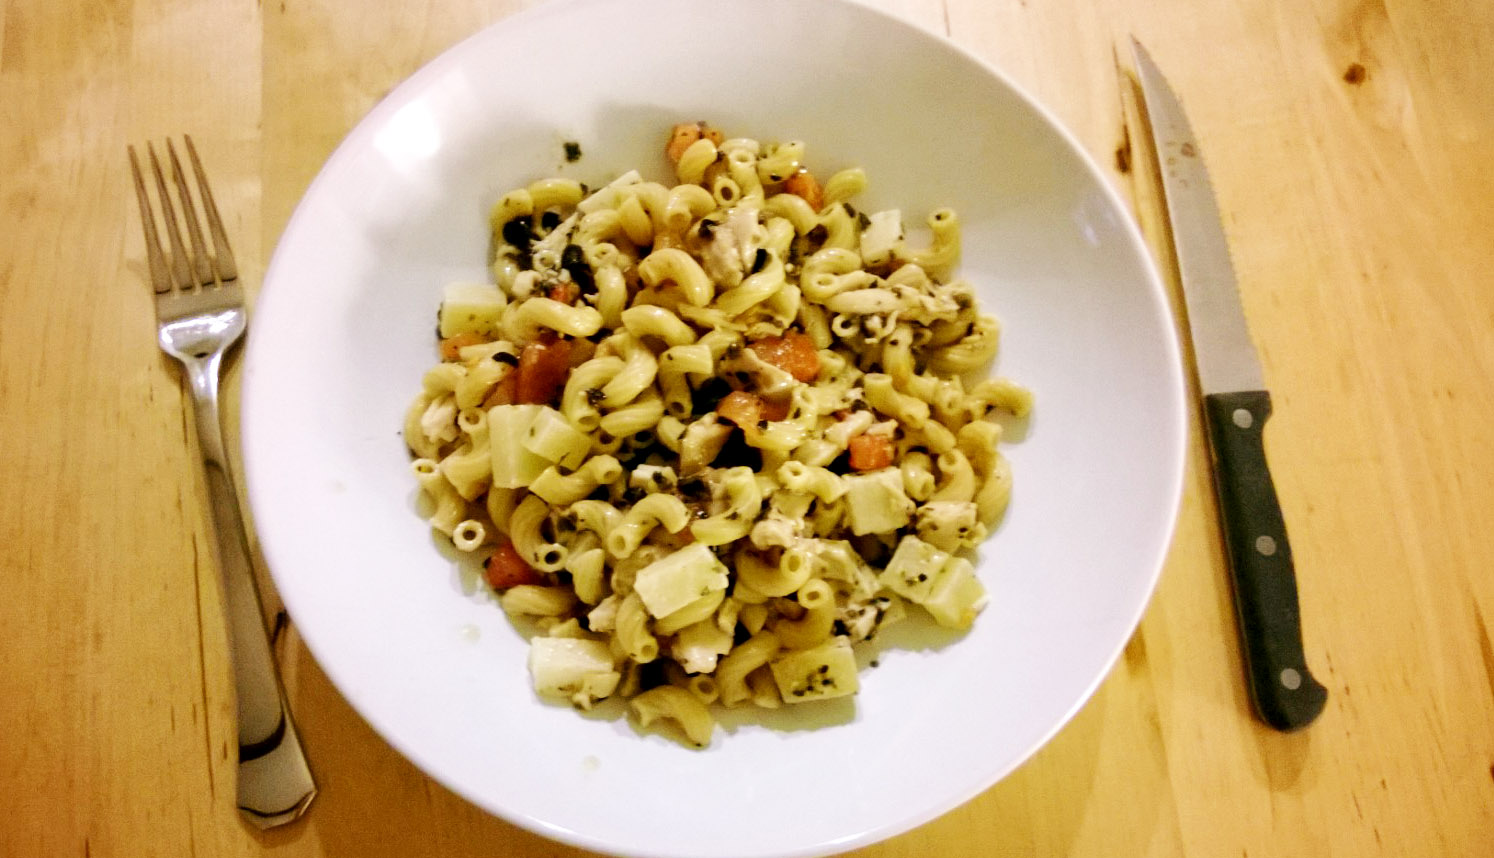 My (leftovers) roasted chicken pasta salad